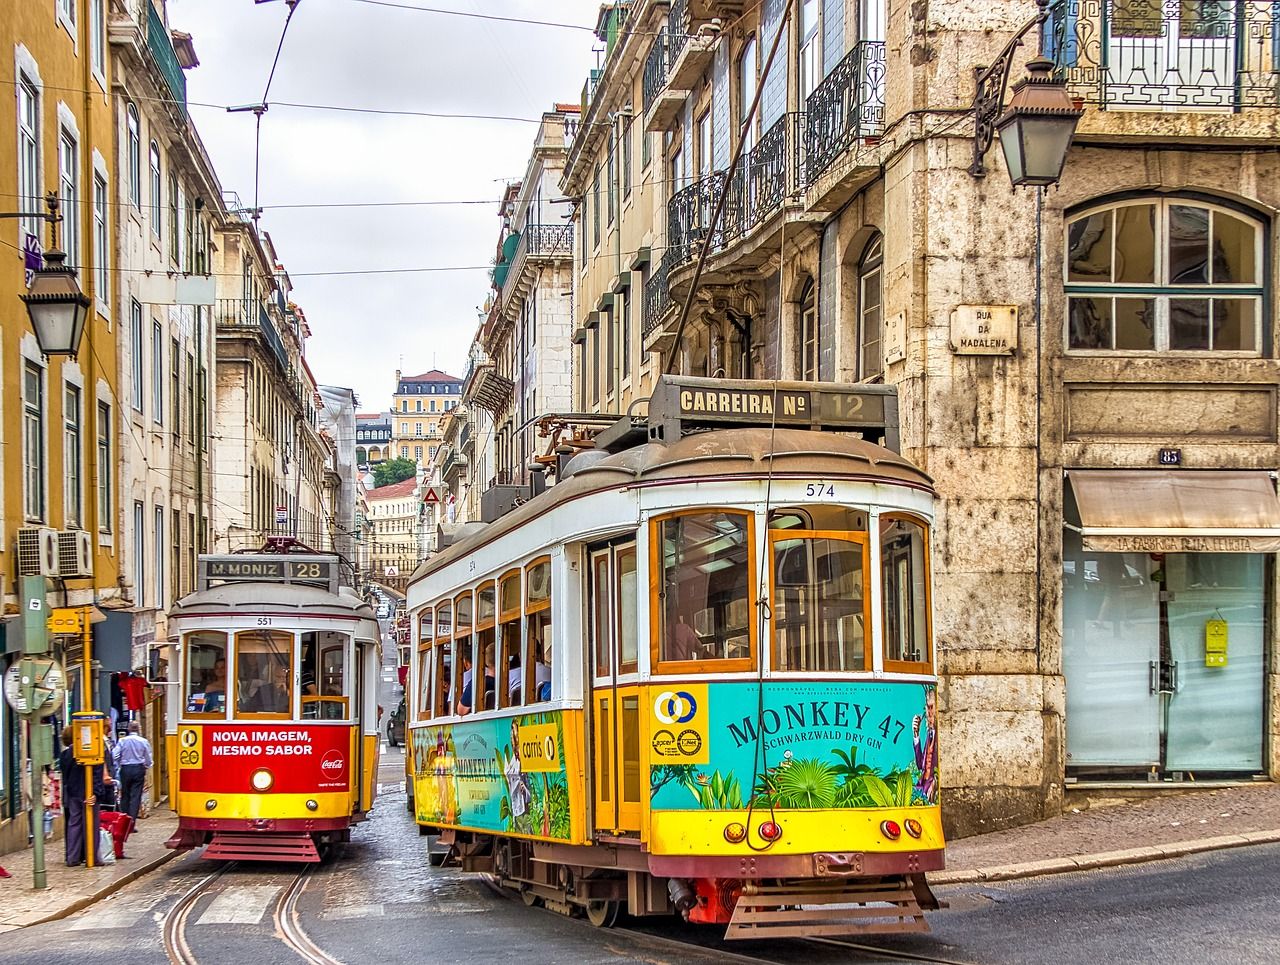 A tram or a light train in Lisbon that offers free rides for those who have a Lisboa Card.